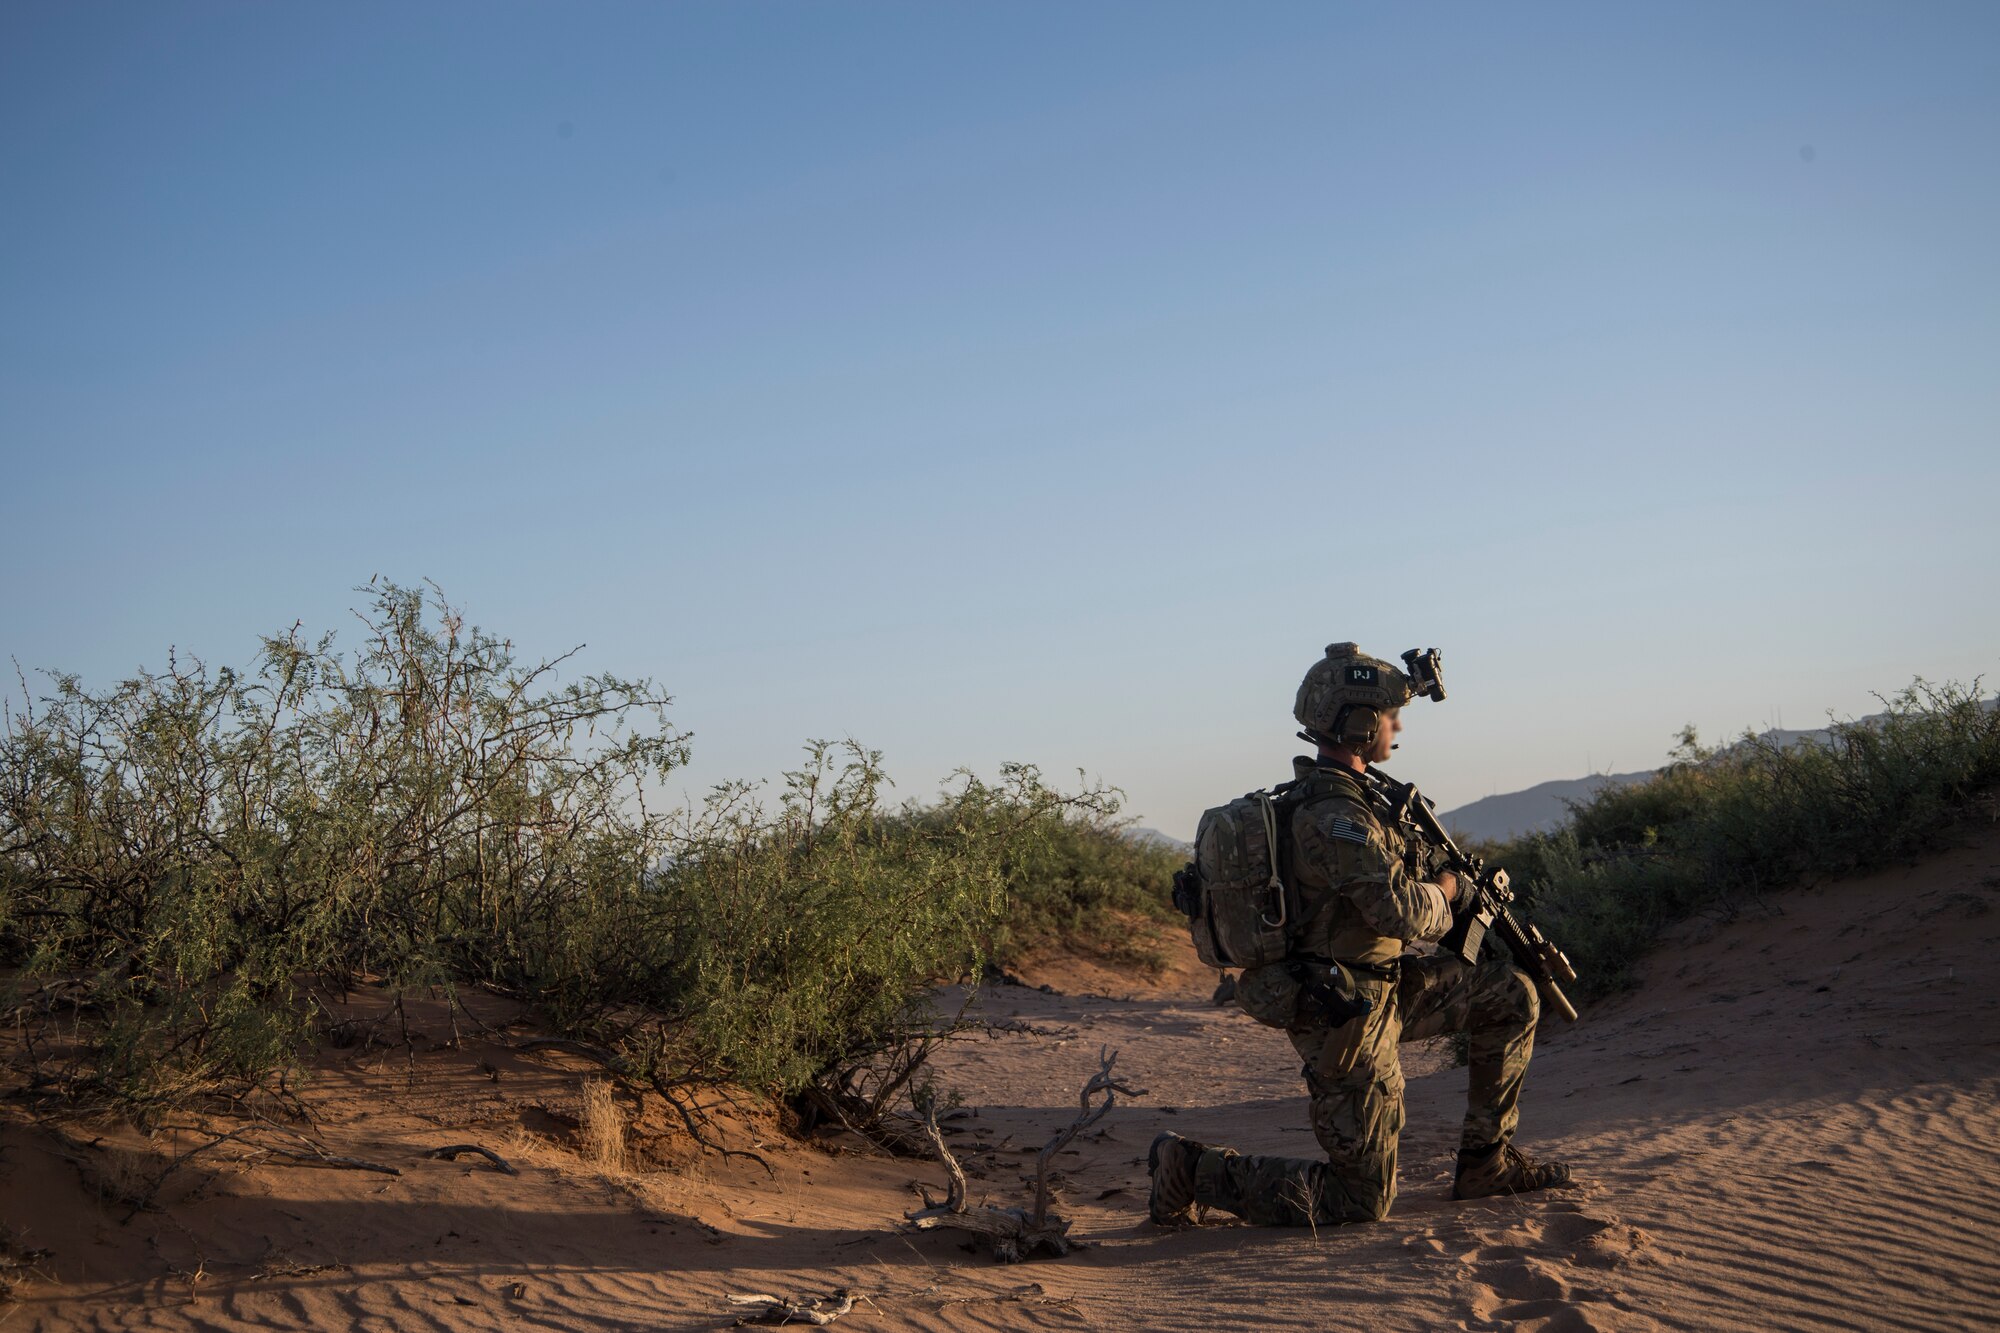 A Special Tactics Airman with the 21st Special Tactics Squadron prepares to infiltrate a compound at Fort Bliss, Texas, June 24, 2018.